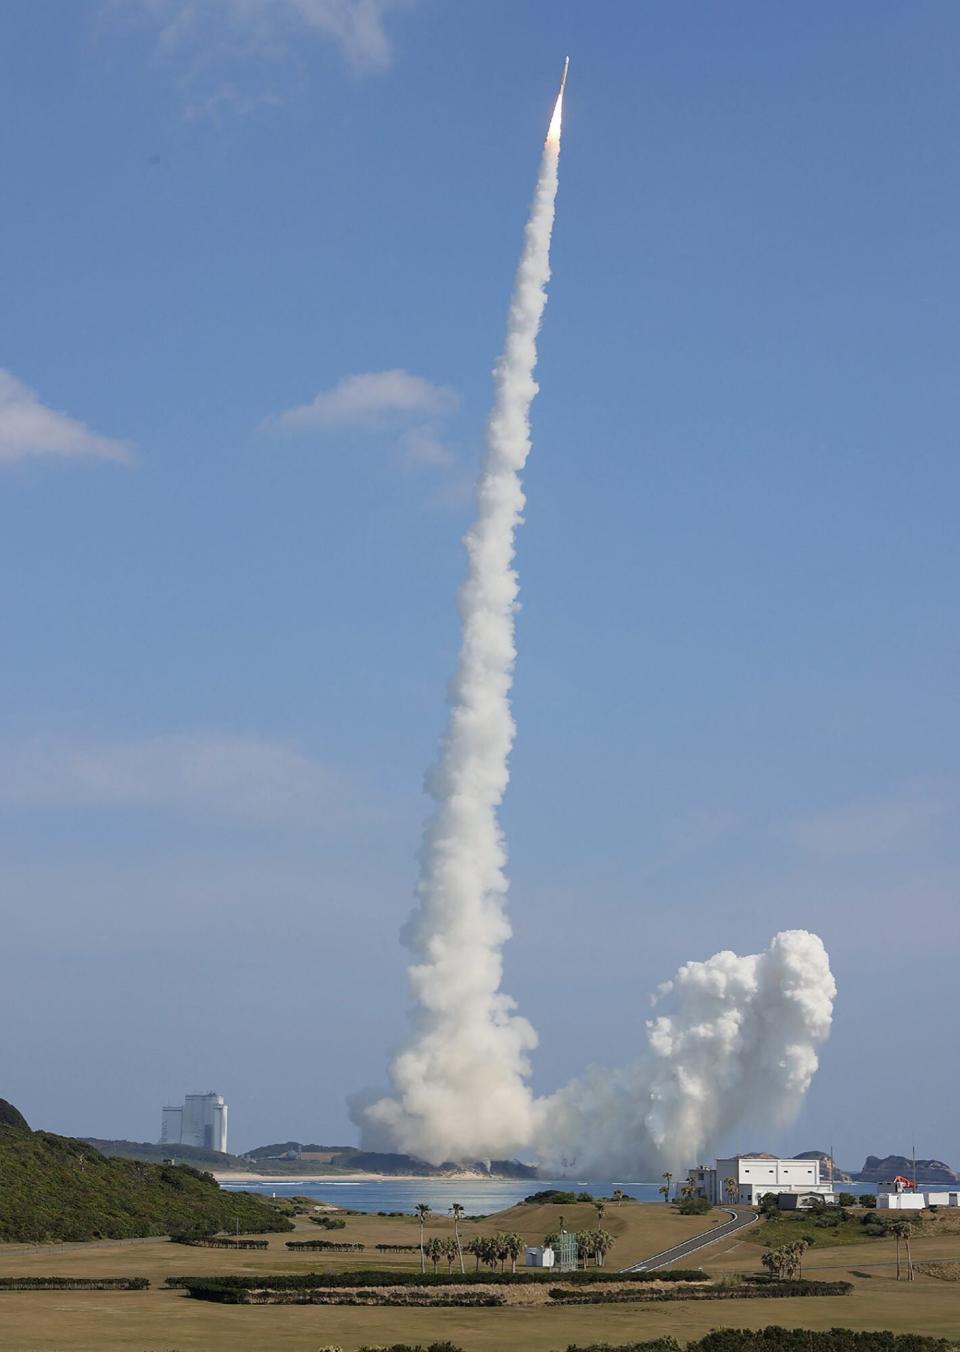 Japan's next generation "H3" rocket, carrying the advanced optical satellite "Daichi 3", leaves the launch pad at the Tanegashima Space Center in Kagoshima, southwestern Japan on March 7, 2023